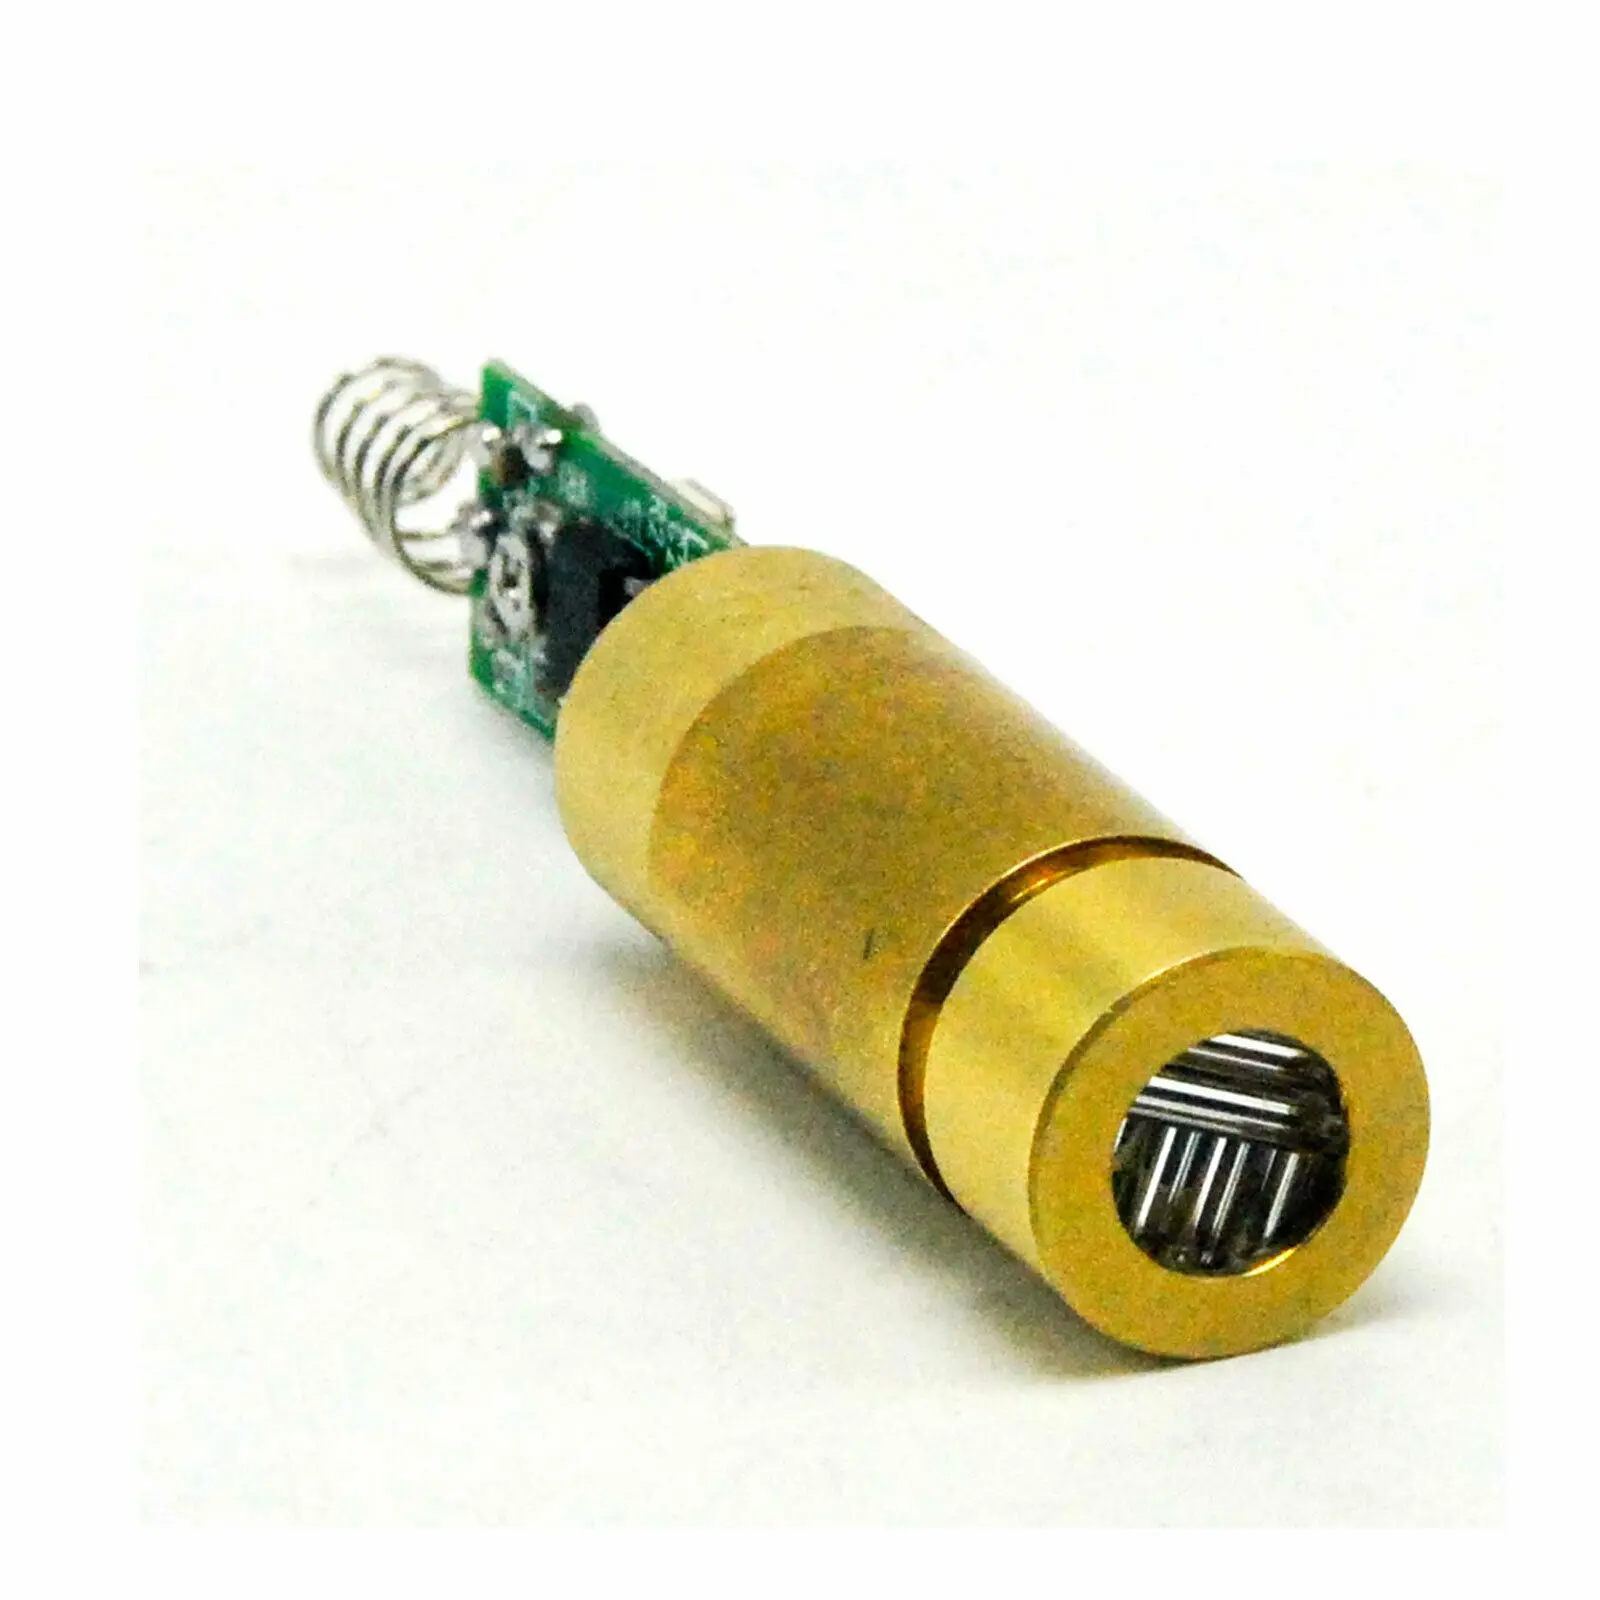 Brass 650nm 100mW Red Laser Cross Diode Module with Driver INDUSTRIAL / LAB